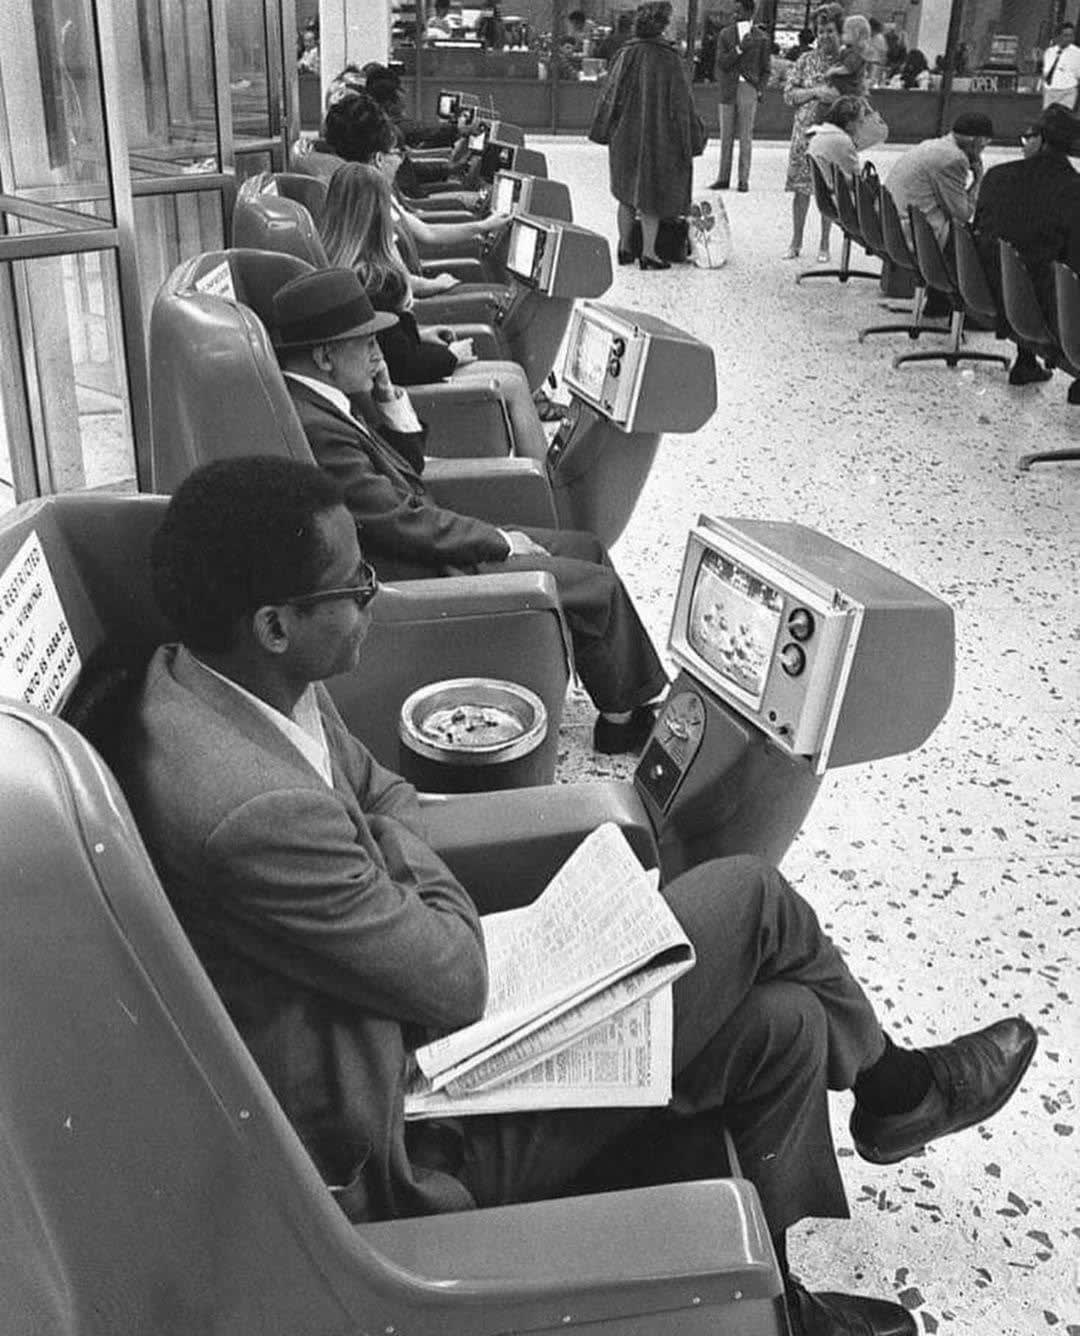 Coin-operated Tel-a-Chairs" in the Los Angeles Greyhound bus terminal. Ashtrays also included. 1969.